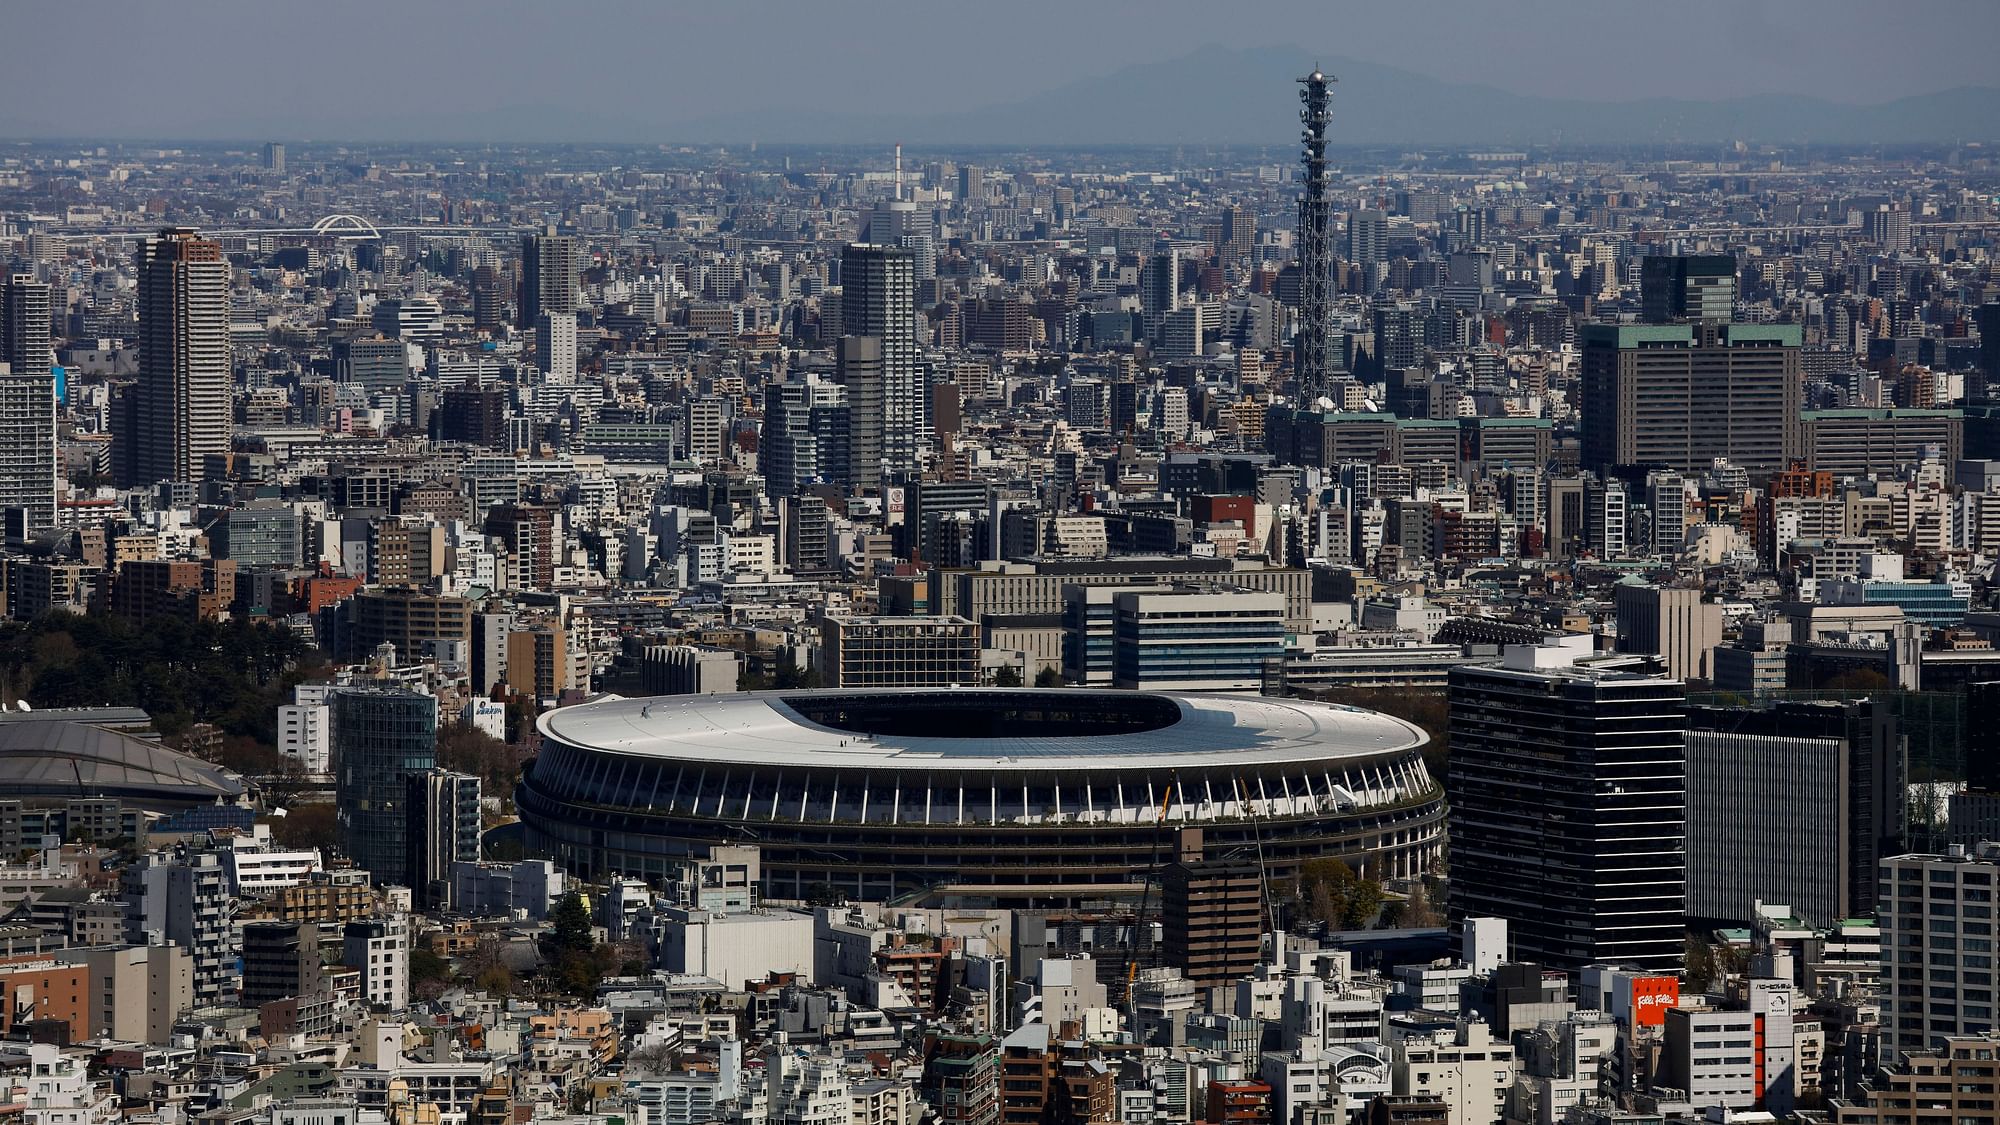 The 2020 Tokyo Olympics have been postponed to 2021.